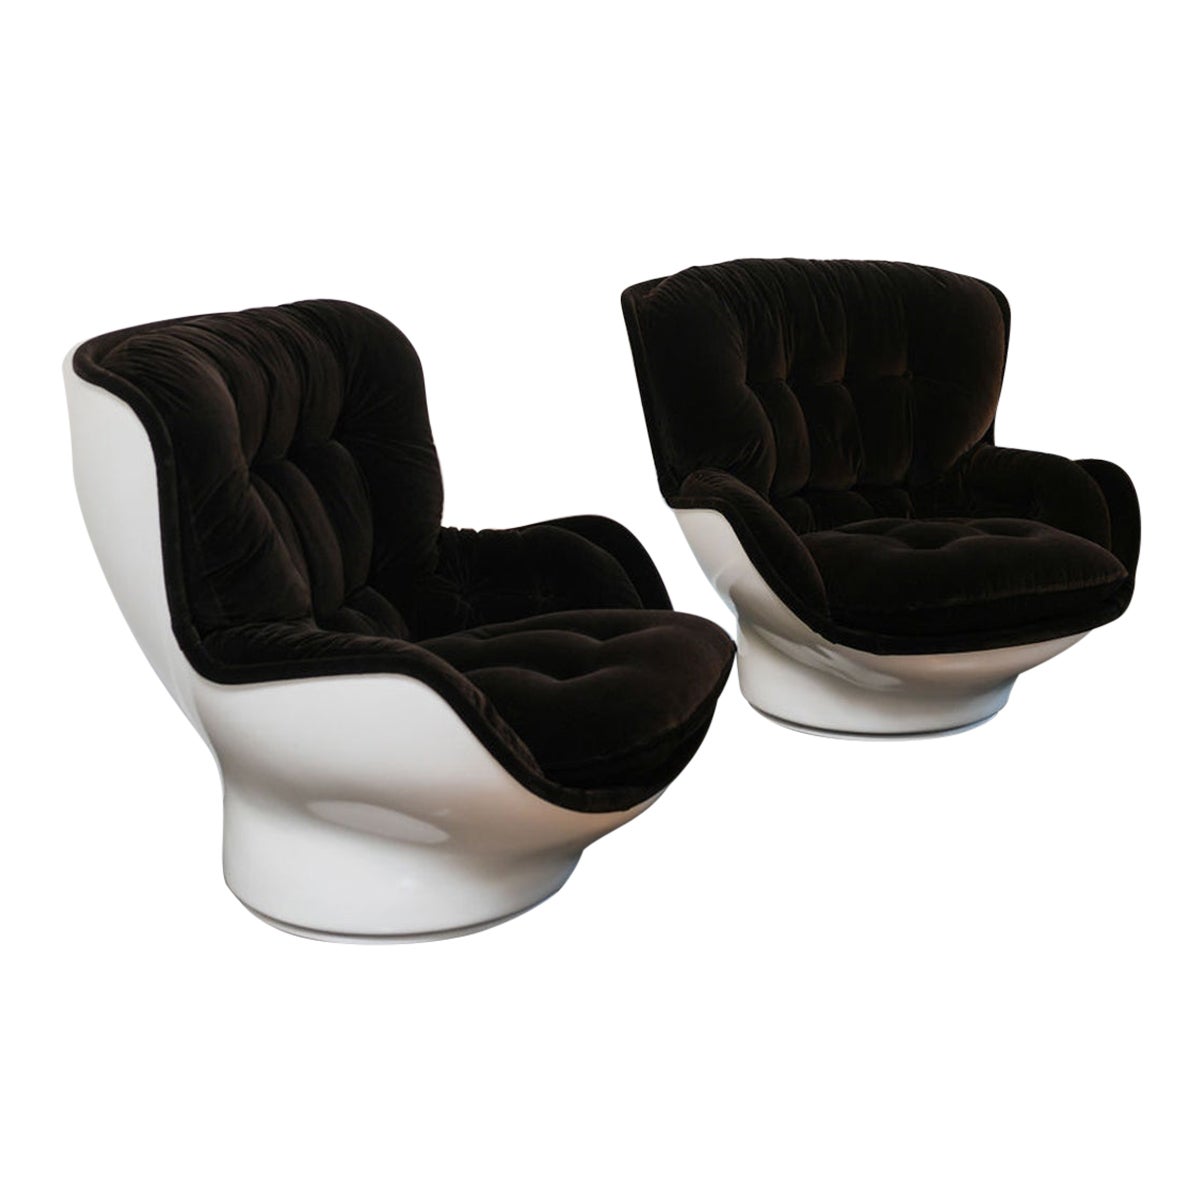 A Rare Pair of Fiberglass Karate Lounge Chairs by Michel Cadestin For Sale